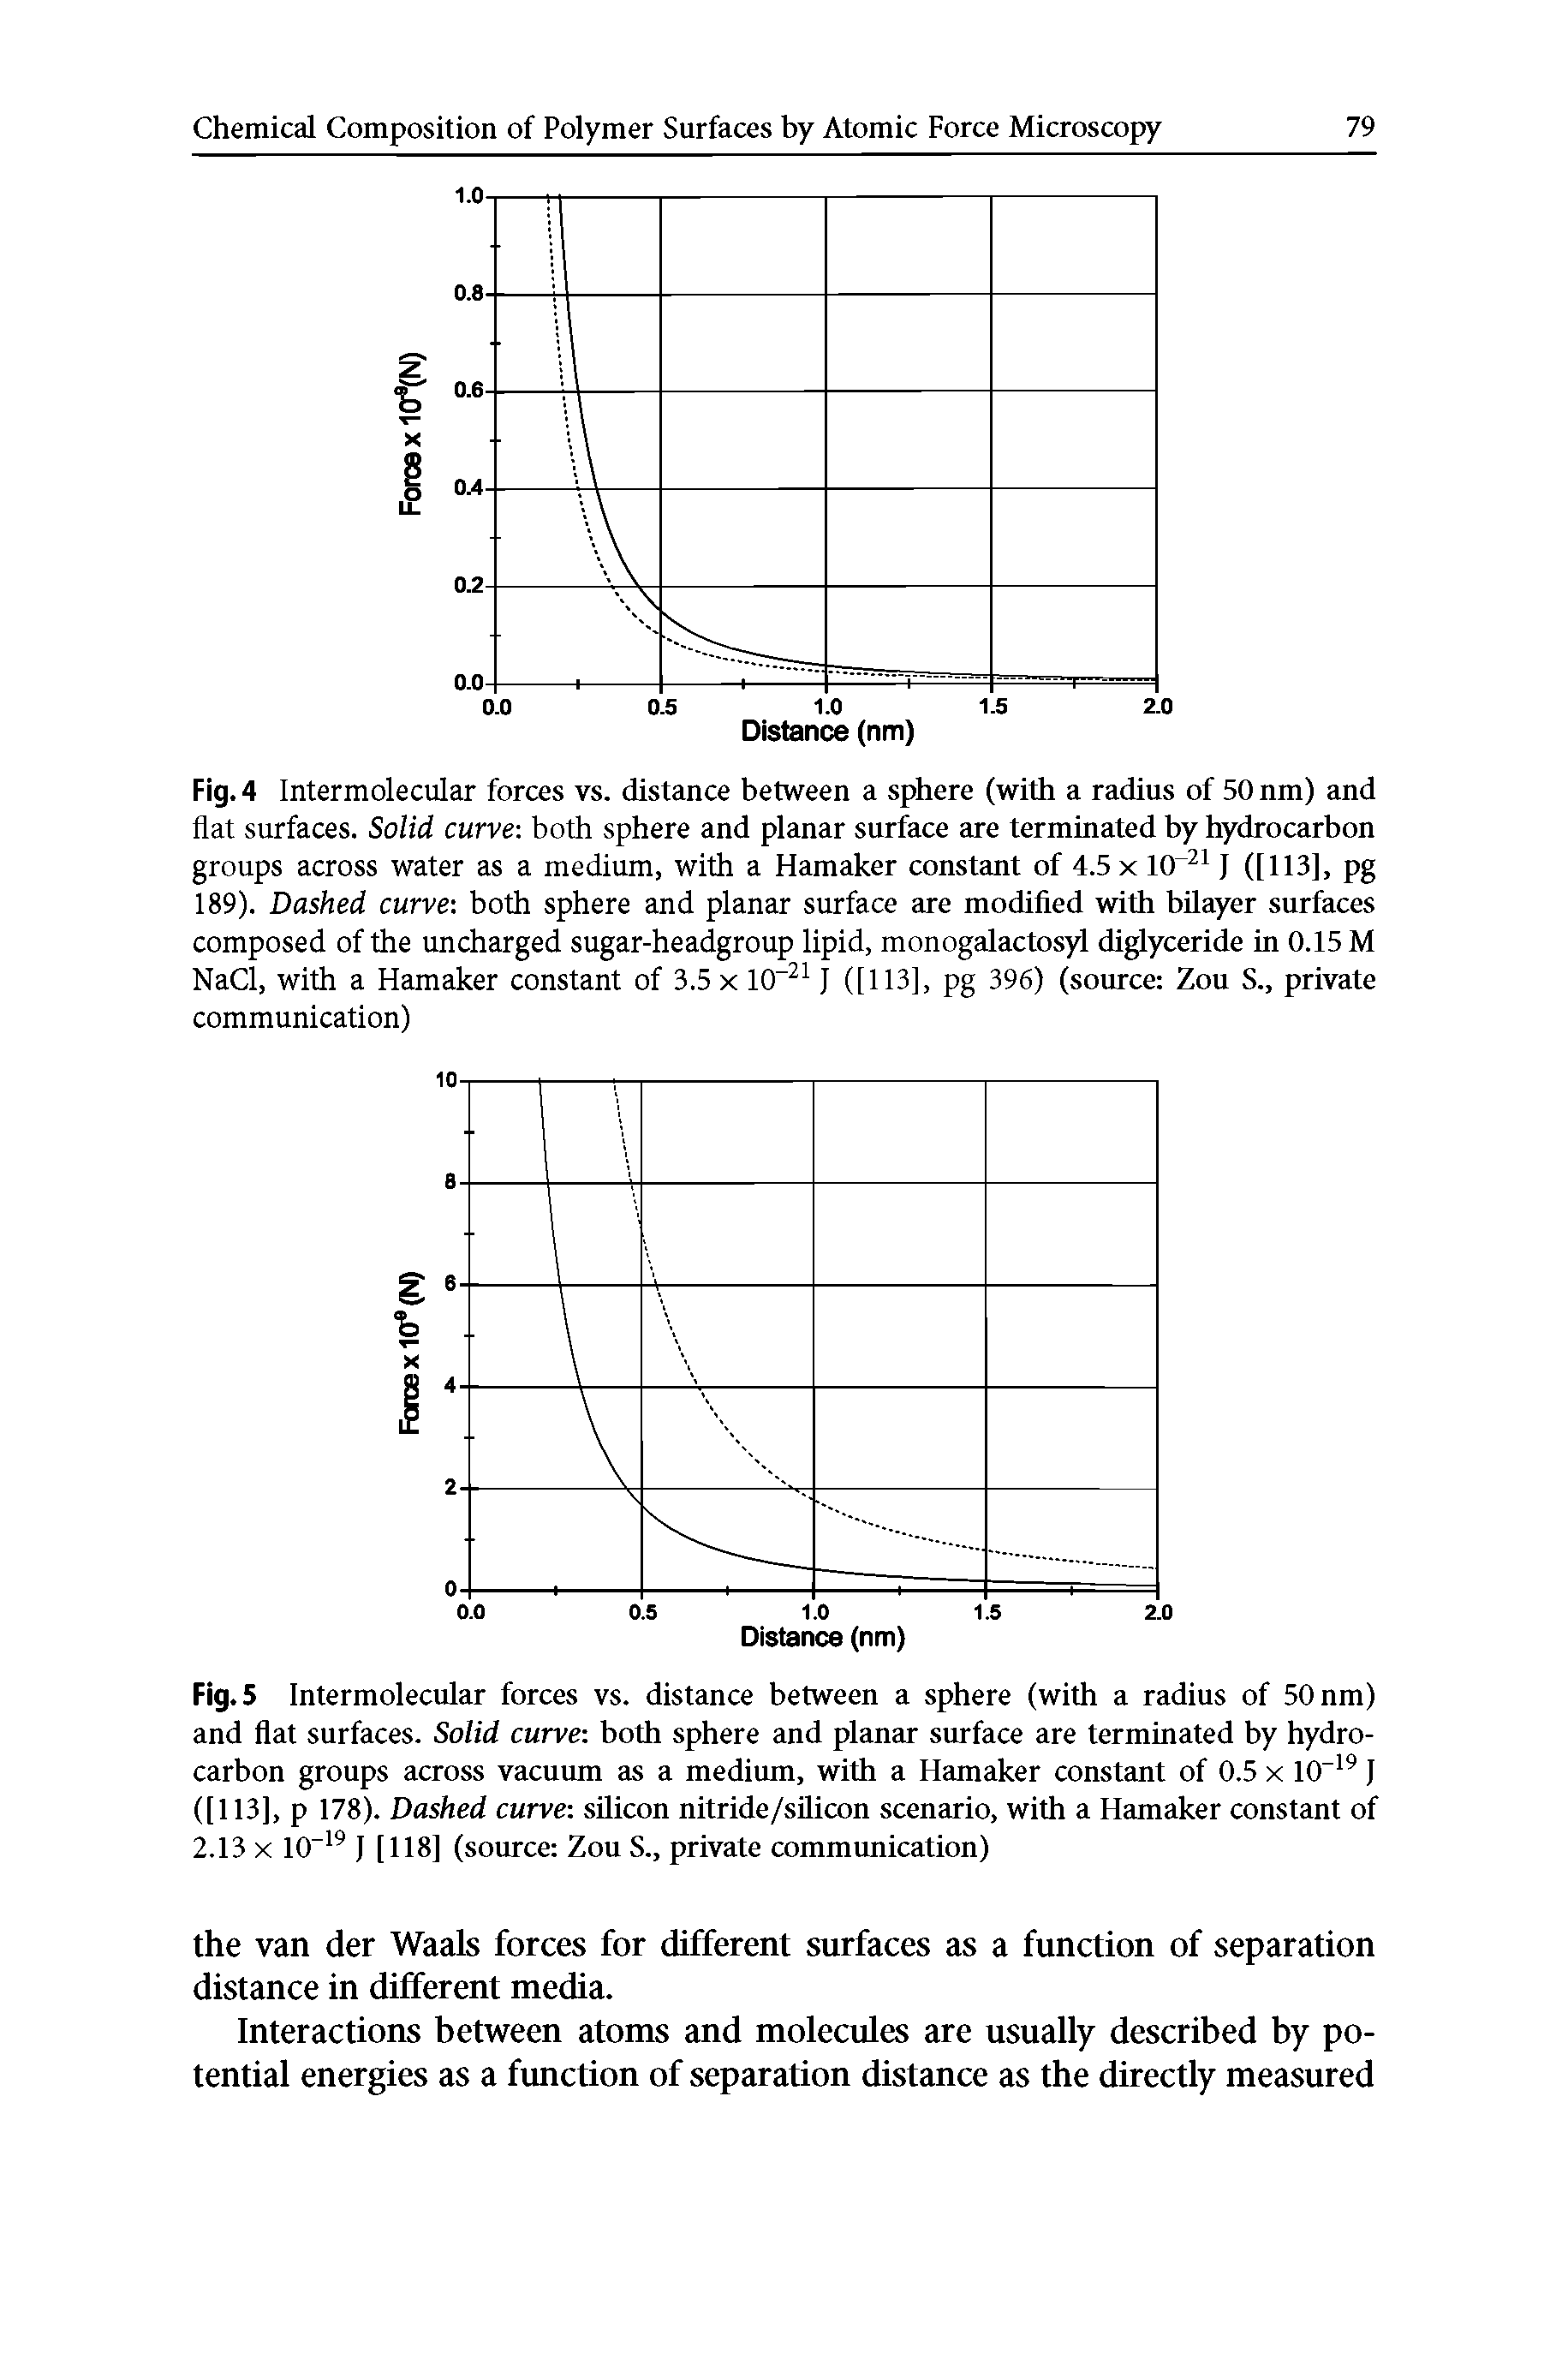 Fig. 4 Intermolecular forces vs. distance between a sphere (with a radius of 50 nm) and flat surfaces. Solid curve both sphere and planar surface are terminated by hydrocarbon groups across water as a medium, with a Hamaker constant of 4.5 x 10 J ([113], pg 189). Dashed curve both sphere and planar surface are modified with bUayer surfaces composed of the uncharged sugar-headgroup lipid, monogalactosyl diglyceride in 0.15 M NaCl, with a Hamaker constant of 3.5 x 10 J ([113], pg 396) (source Zou S., private communication)...